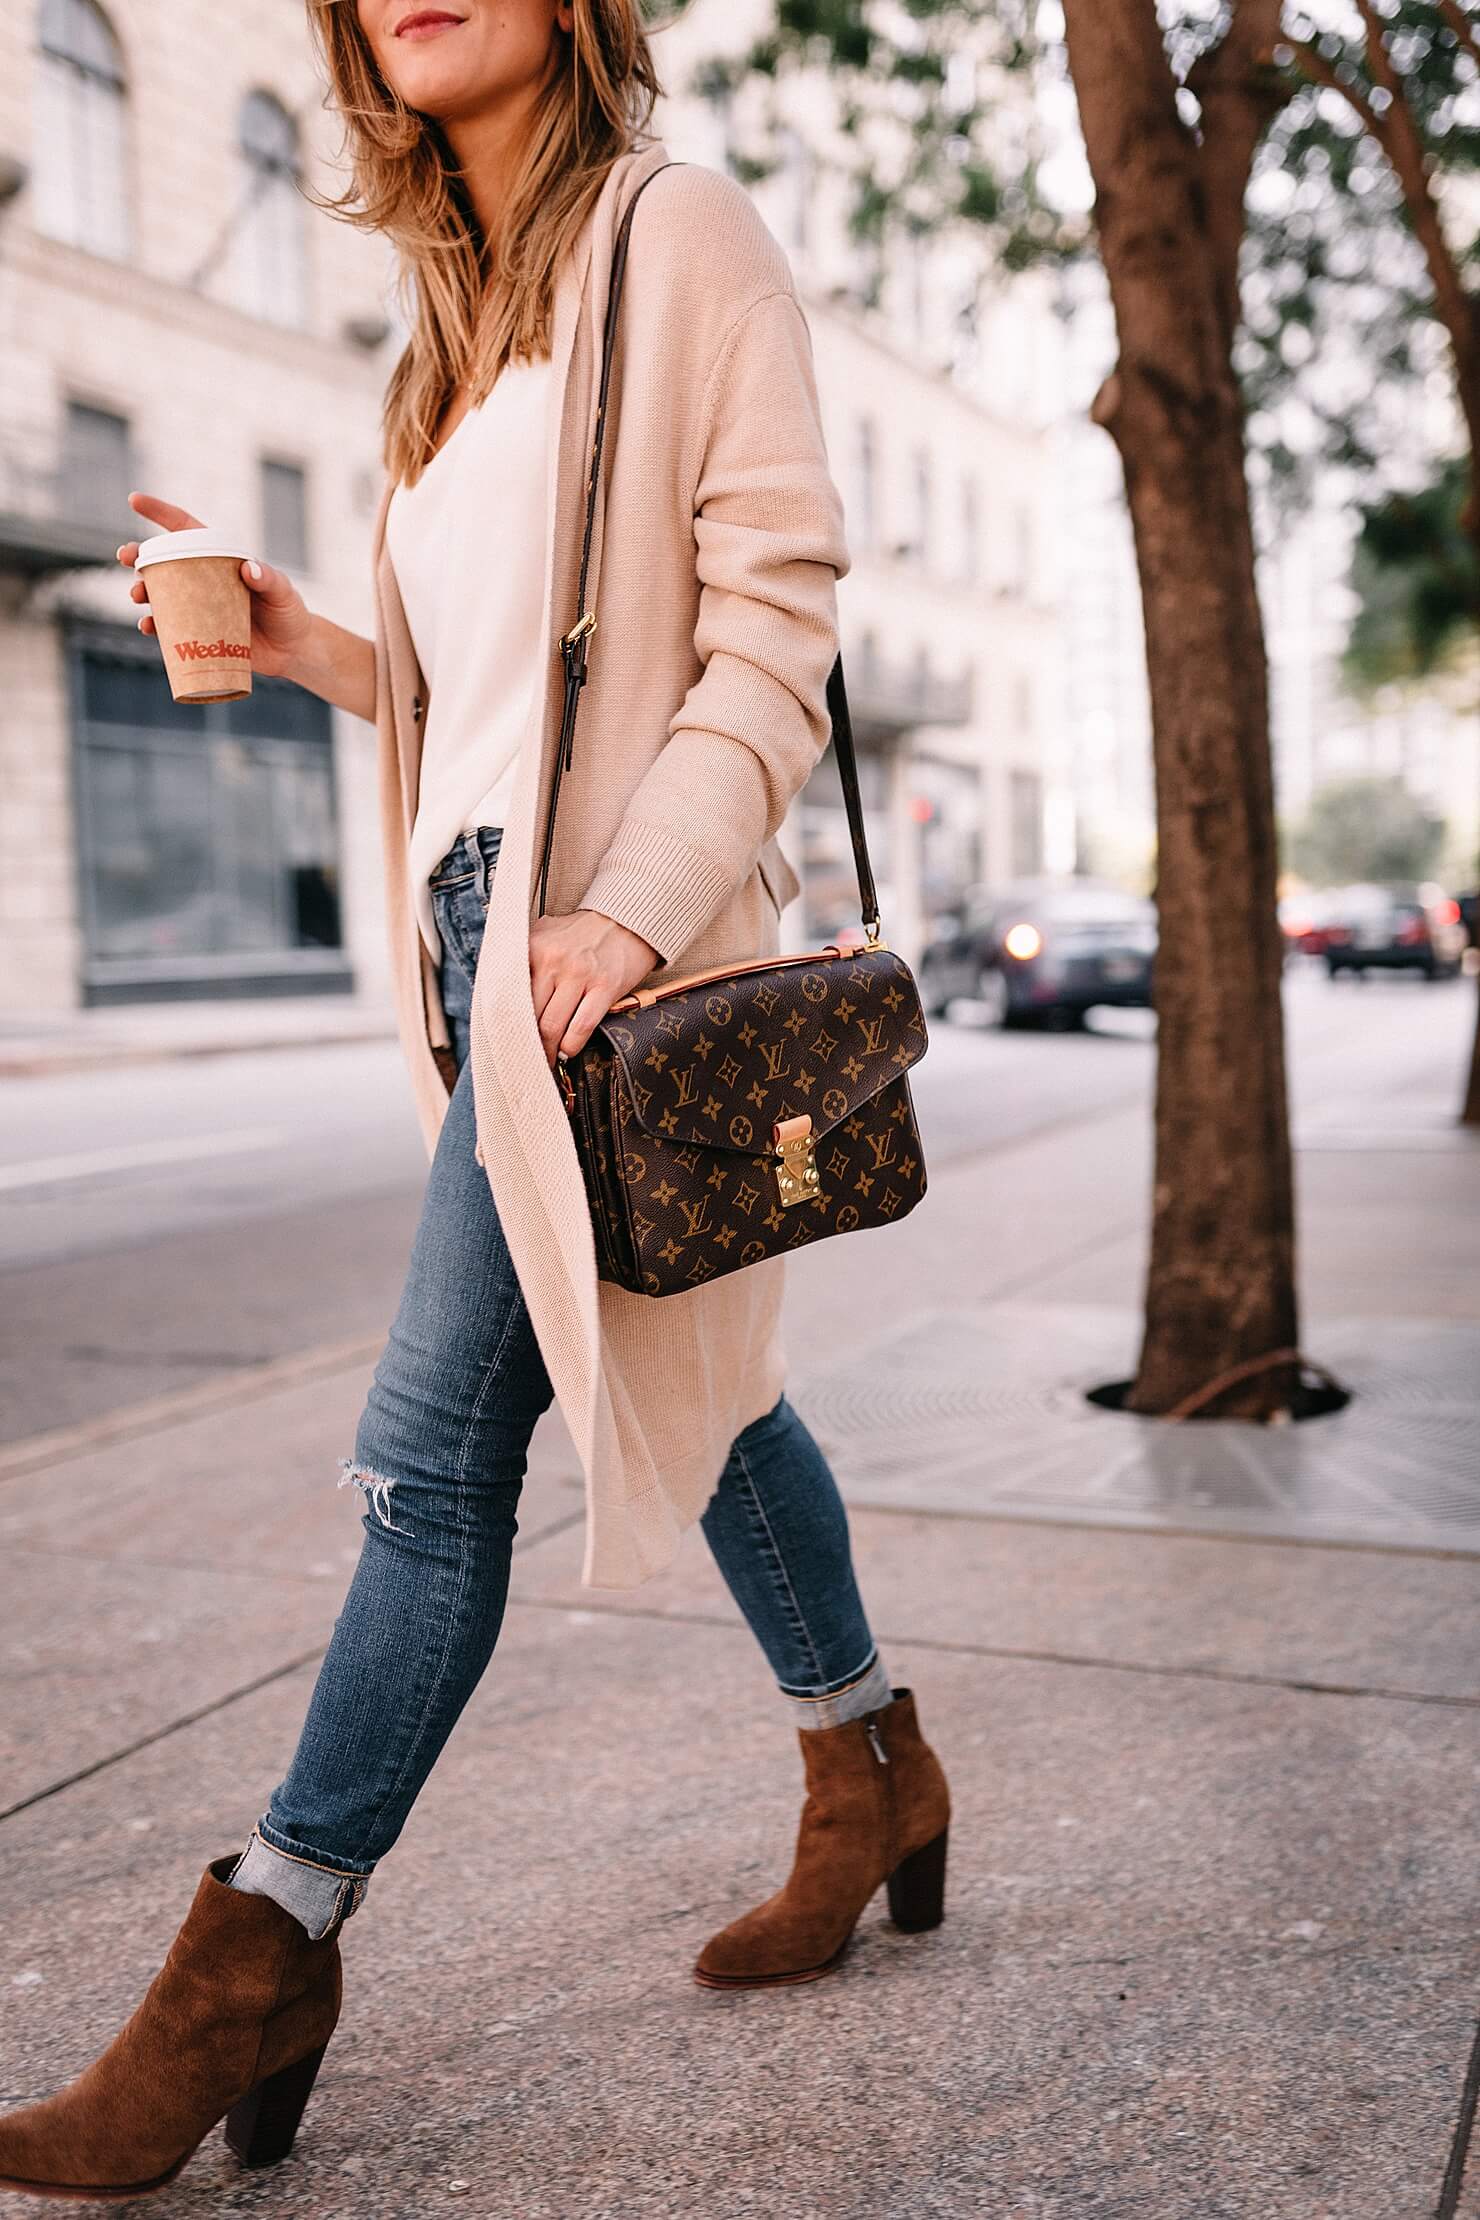 Louis Vuiton POCHETTE METIS crossbody, long cream cardigan outfit, fall outfit inspiration